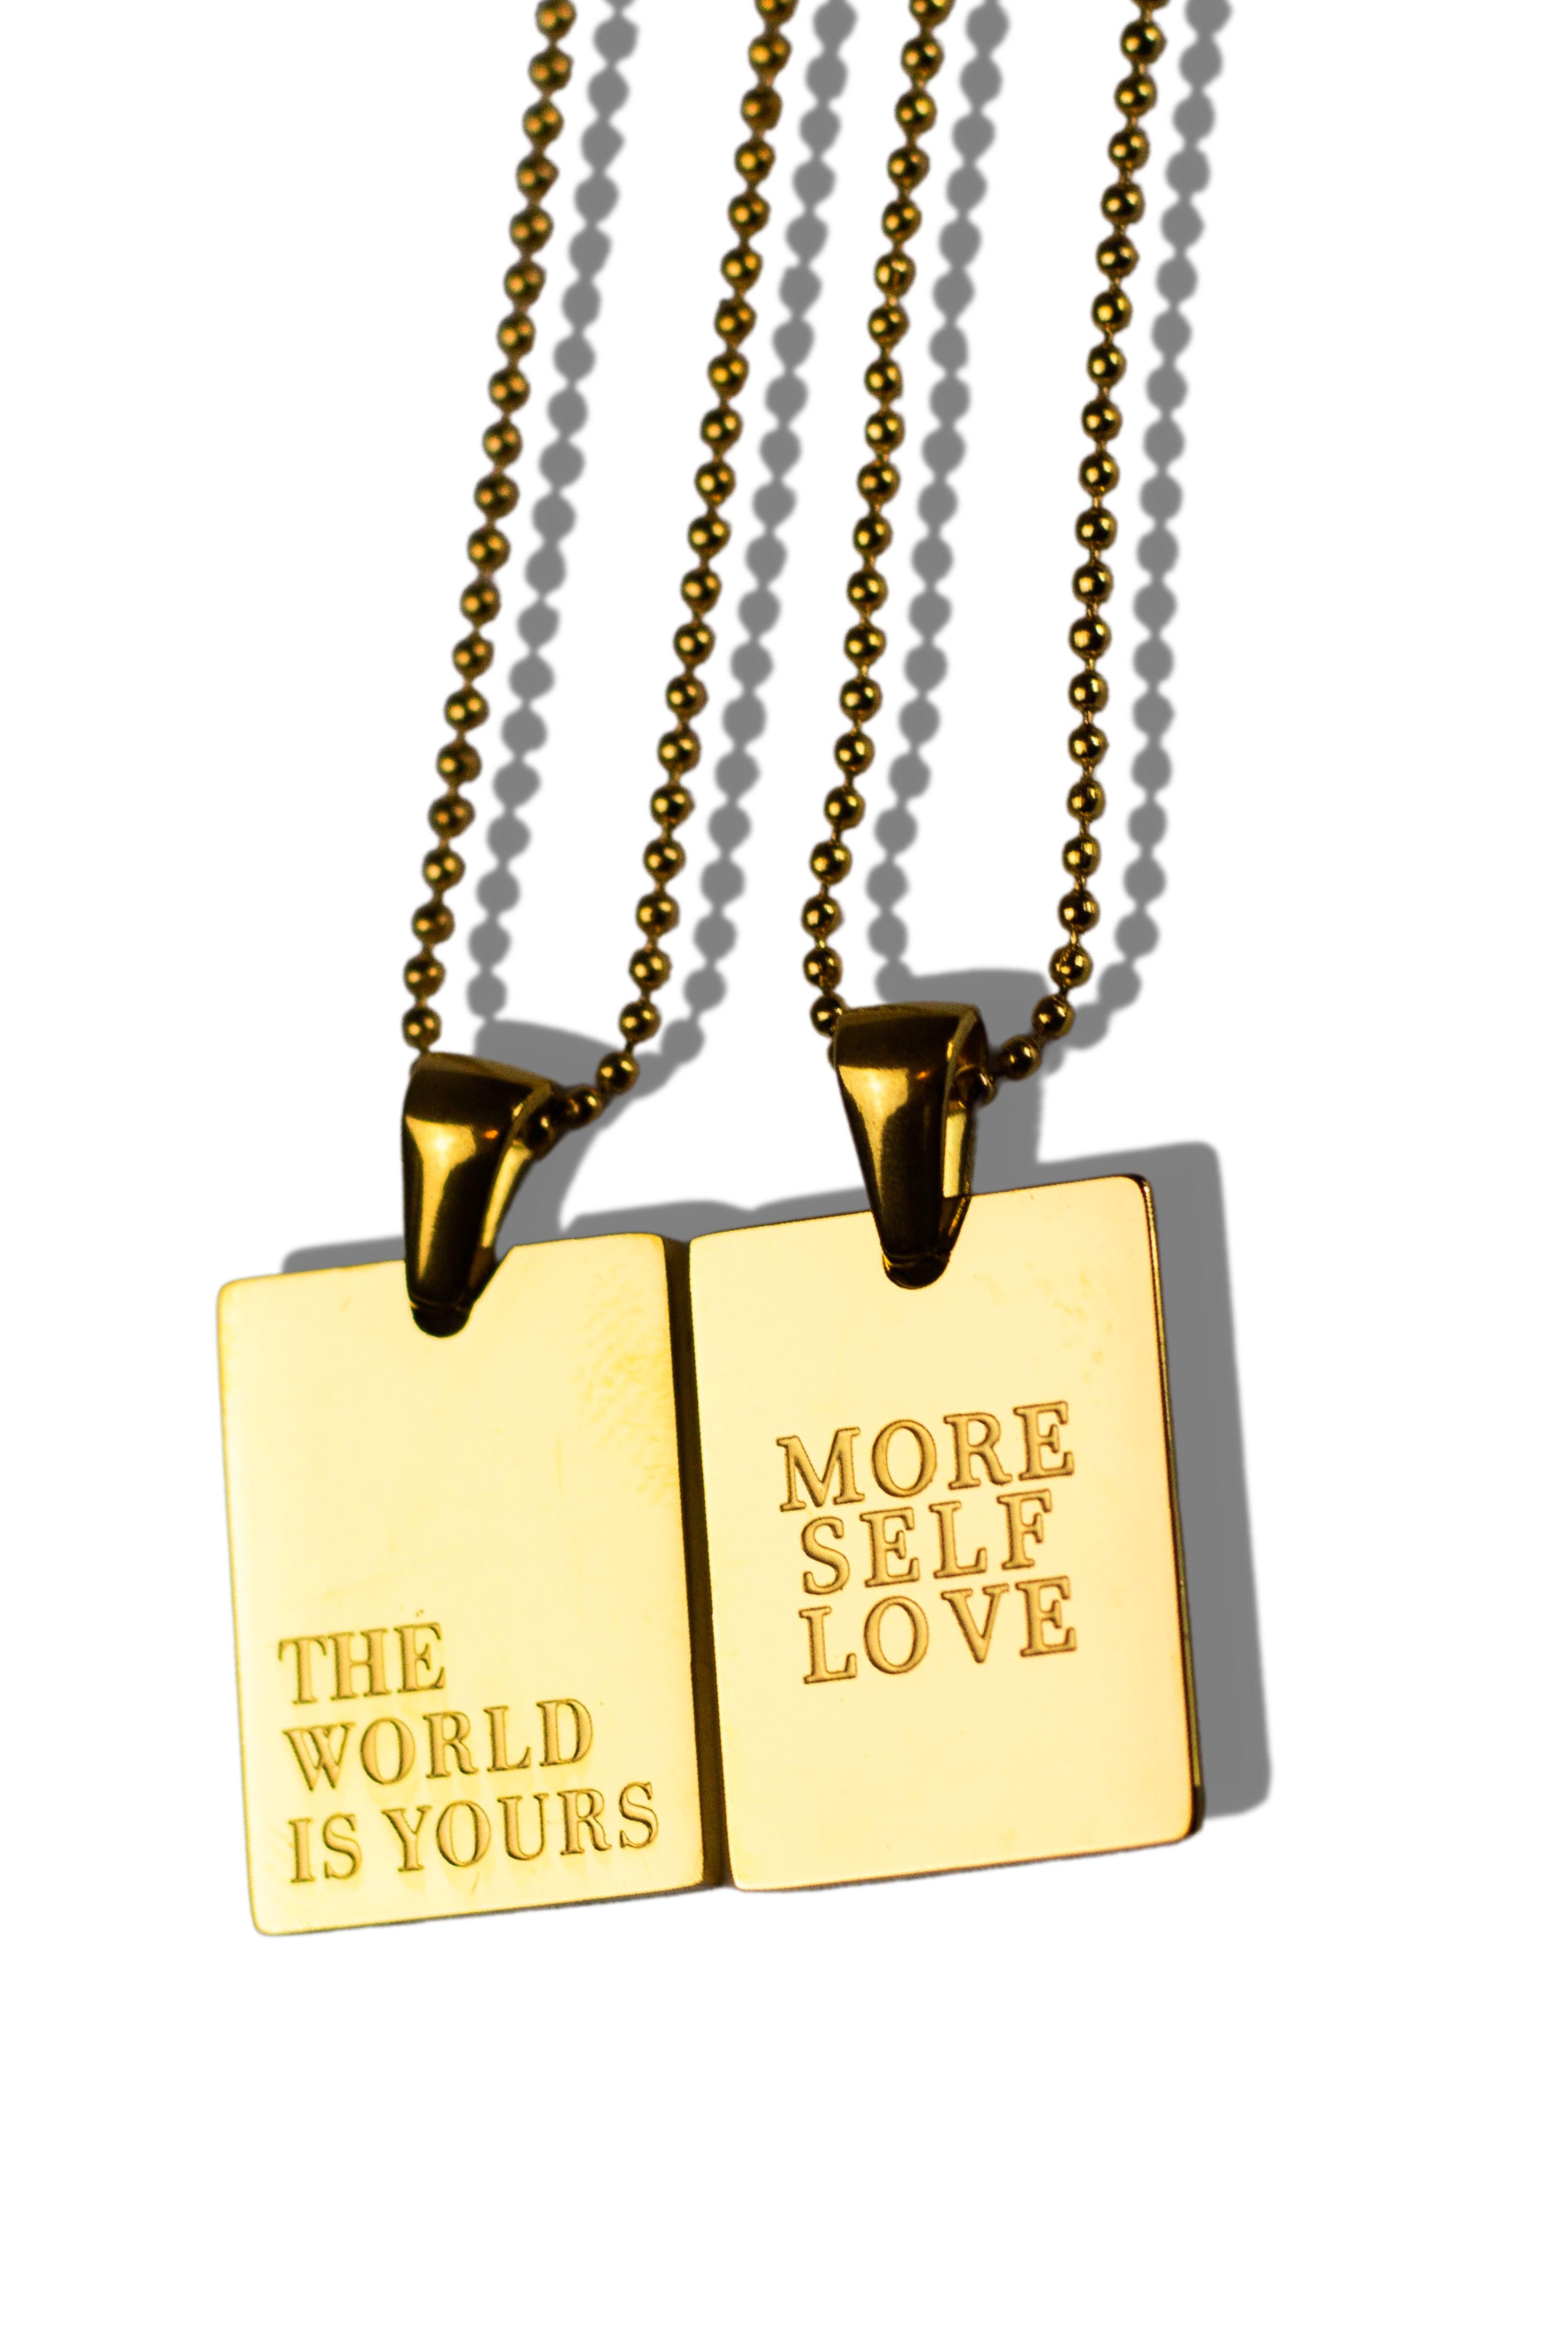 Two 18K stainless steel gold necklaces. The words printed on one of the necklaces are, "THE WORLD IS YOURS" and "MORE SELF LOVE" on the other necklace.